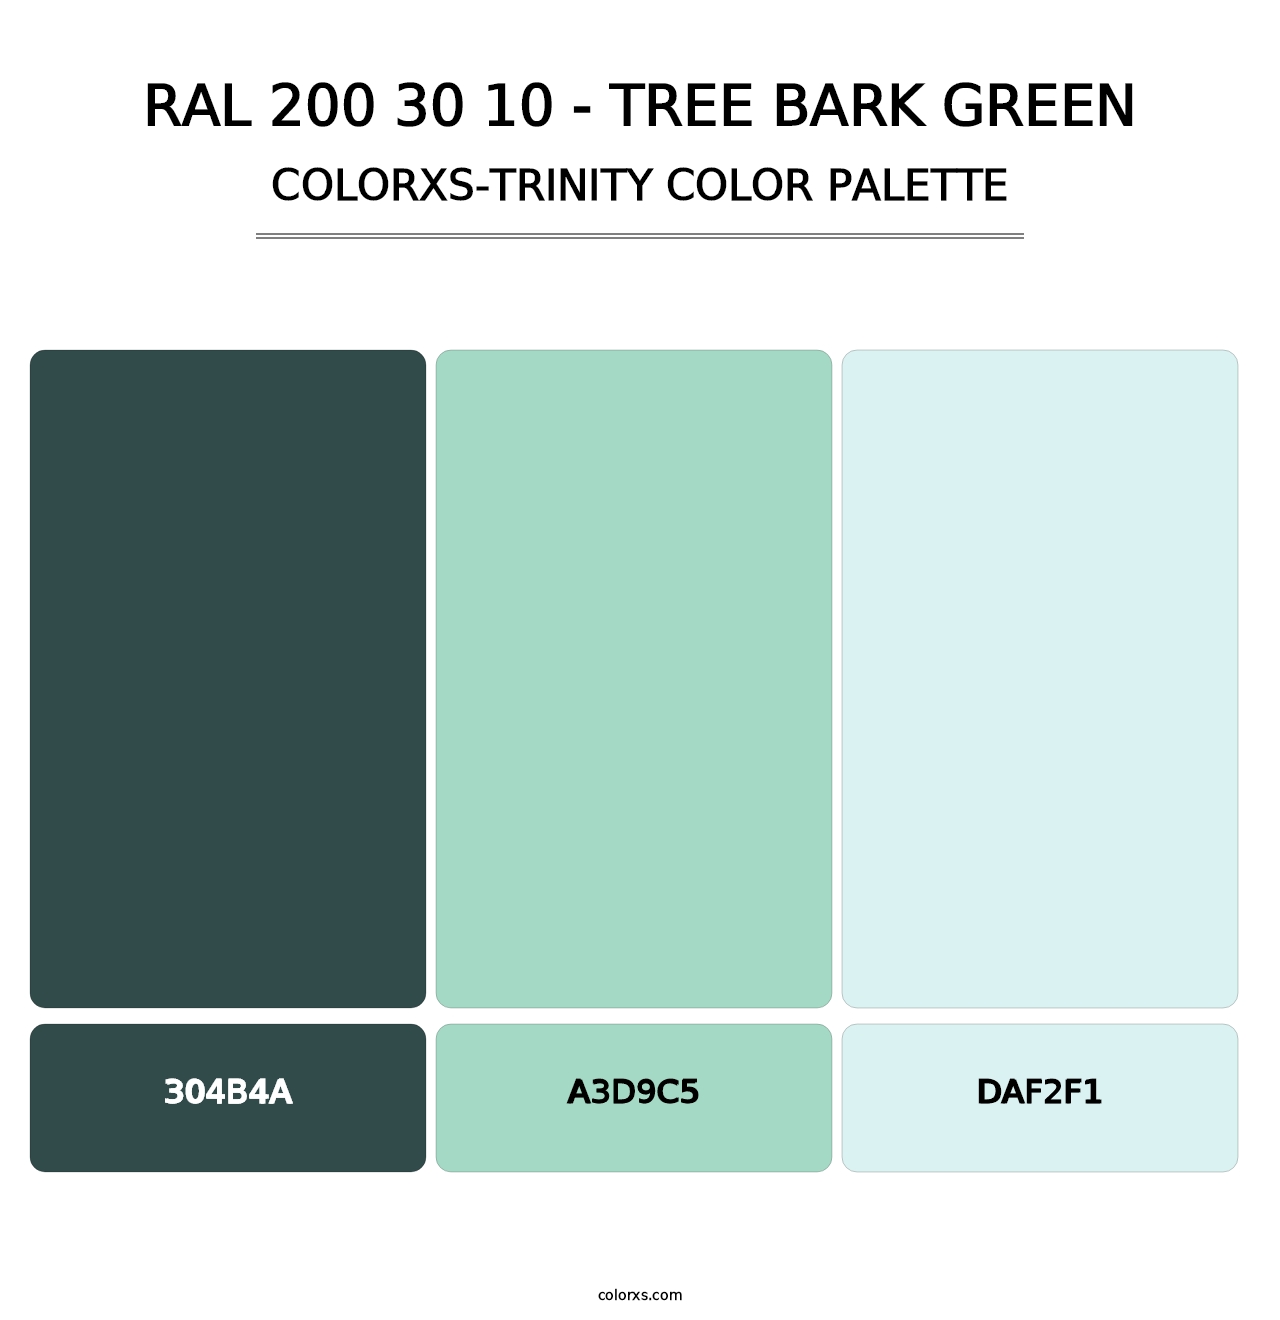 RAL 200 30 10 - Tree Bark Green - Colorxs Trinity Palette